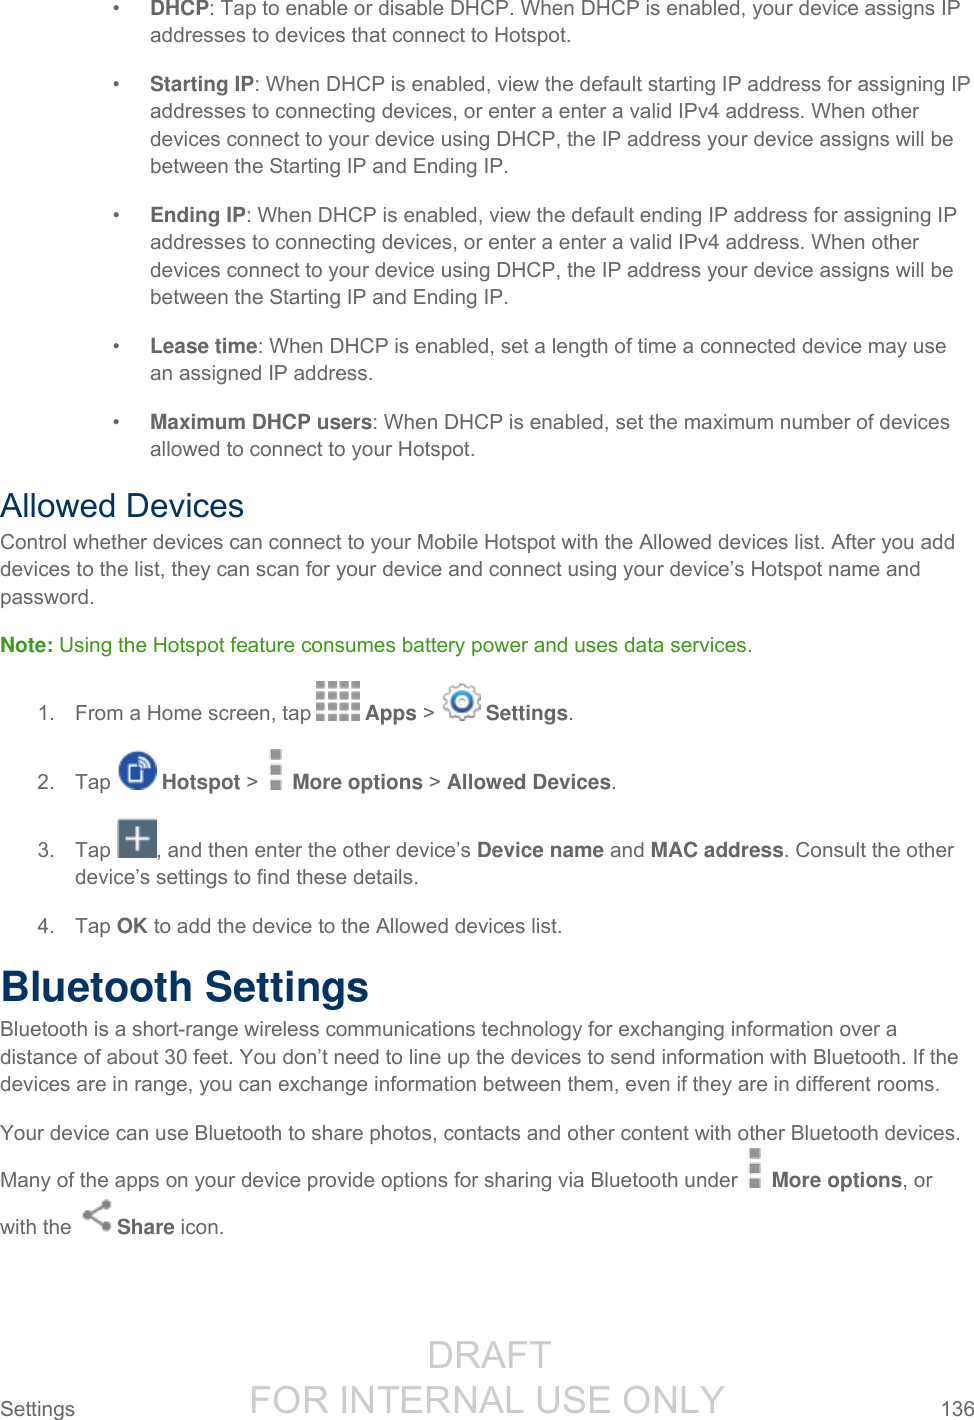                  DRAFT FOR INTERNAL USE ONLY Settings  136   • DHCP: Tap to enable or disable DHCP. When DHCP is enabled, your device assigns IP addresses to devices that connect to Hotspot. • Starting IP: When DHCP is enabled, view the default starting IP address for assigning IP addresses to connecting devices, or enter a enter a valid IPv4 address. When other devices connect to your device using DHCP, the IP address your device assigns will be between the Starting IP and Ending IP. • Ending IP: When DHCP is enabled, view the default ending IP address for assigning IP addresses to connecting devices, or enter a enter a valid IPv4 address. When other devices connect to your device using DHCP, the IP address your device assigns will be between the Starting IP and Ending IP. • Lease time: When DHCP is enabled, set a length of time a connected device may use an assigned IP address. • Maximum DHCP users: When DHCP is enabled, set the maximum number of devices allowed to connect to your Hotspot. Allowed Devices Control whether devices can connect to your Mobile Hotspot with the Allowed devices list. After you add devices to the list, they can scan for your device and connect using your device’s Hotspot name and password. Note: Using the Hotspot feature consumes battery power and uses data services. 1.  From a Home screen, tap   Apps &gt;   Settings.  2.  Tap   Hotspot &gt;   More options &gt; Allowed Devices. 3.  Tap  , and then enter the other device’s Device name and MAC address. Consult the other device’s settings to find these details. 4.  Tap OK to add the device to the Allowed devices list. Bluetooth Settings Bluetooth is a short-range wireless communications technology for exchanging information over a distance of about 30 feet. You don’t need to line up the devices to send information with Bluetooth. If the devices are in range, you can exchange information between them, even if they are in different rooms. Your device can use Bluetooth to share photos, contacts and other content with other Bluetooth devices. Many of the apps on your device provide options for sharing via Bluetooth under   More options, or with the  Share icon. 